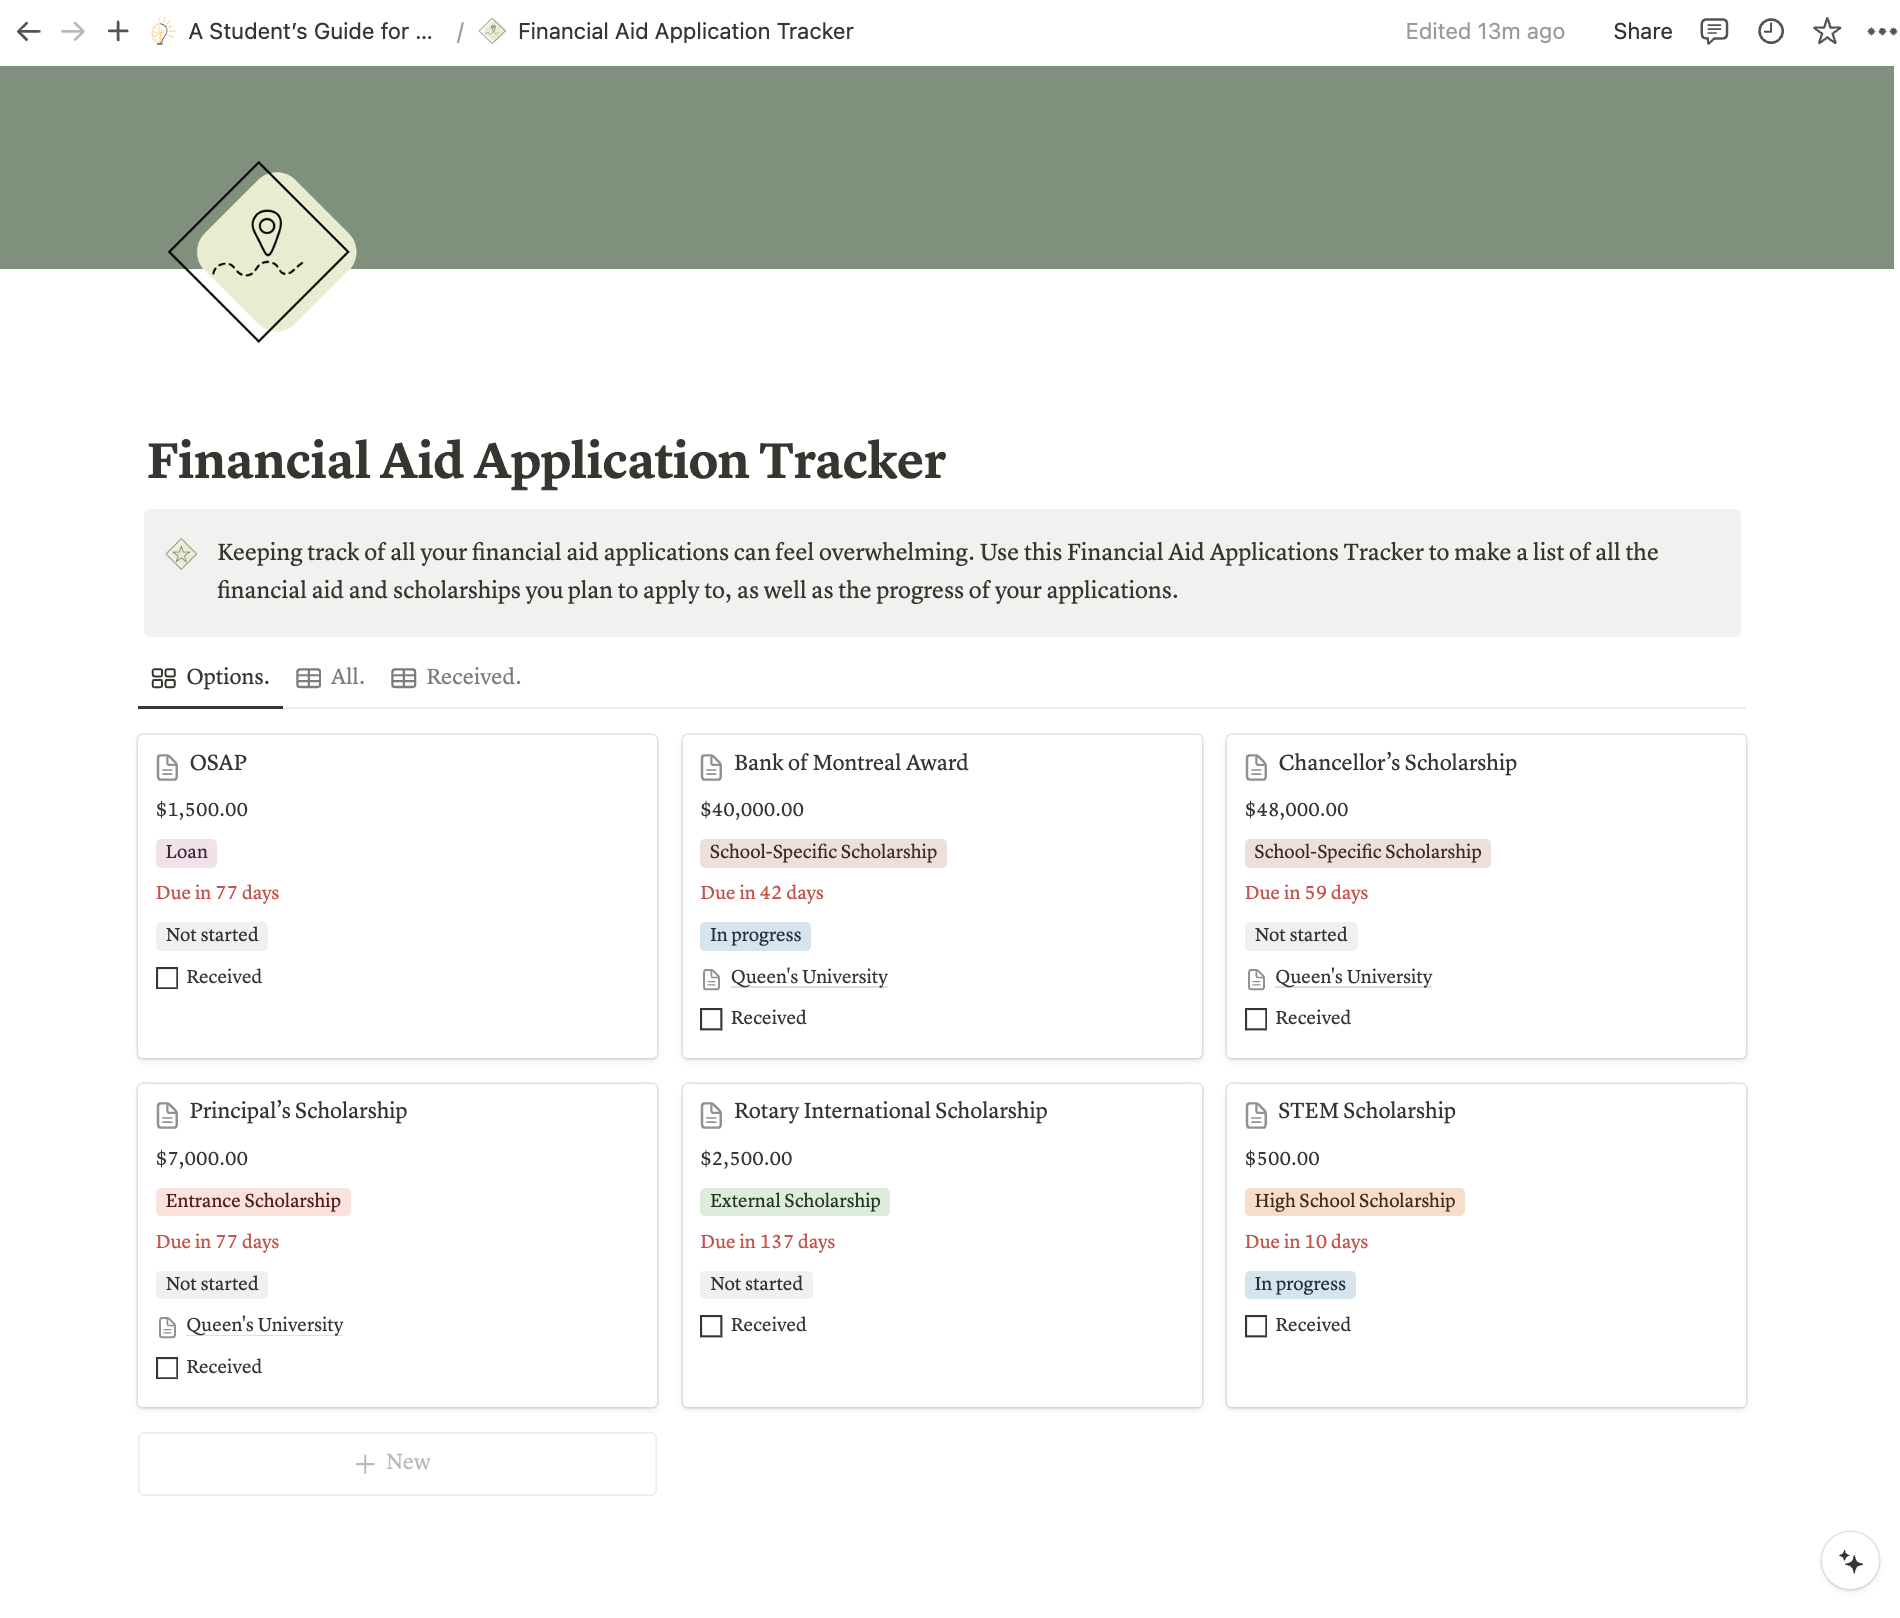 An example of a completed Financial Aid Application Tracker in the Notion database, detailing deadlines and relationships to other pages in the database.